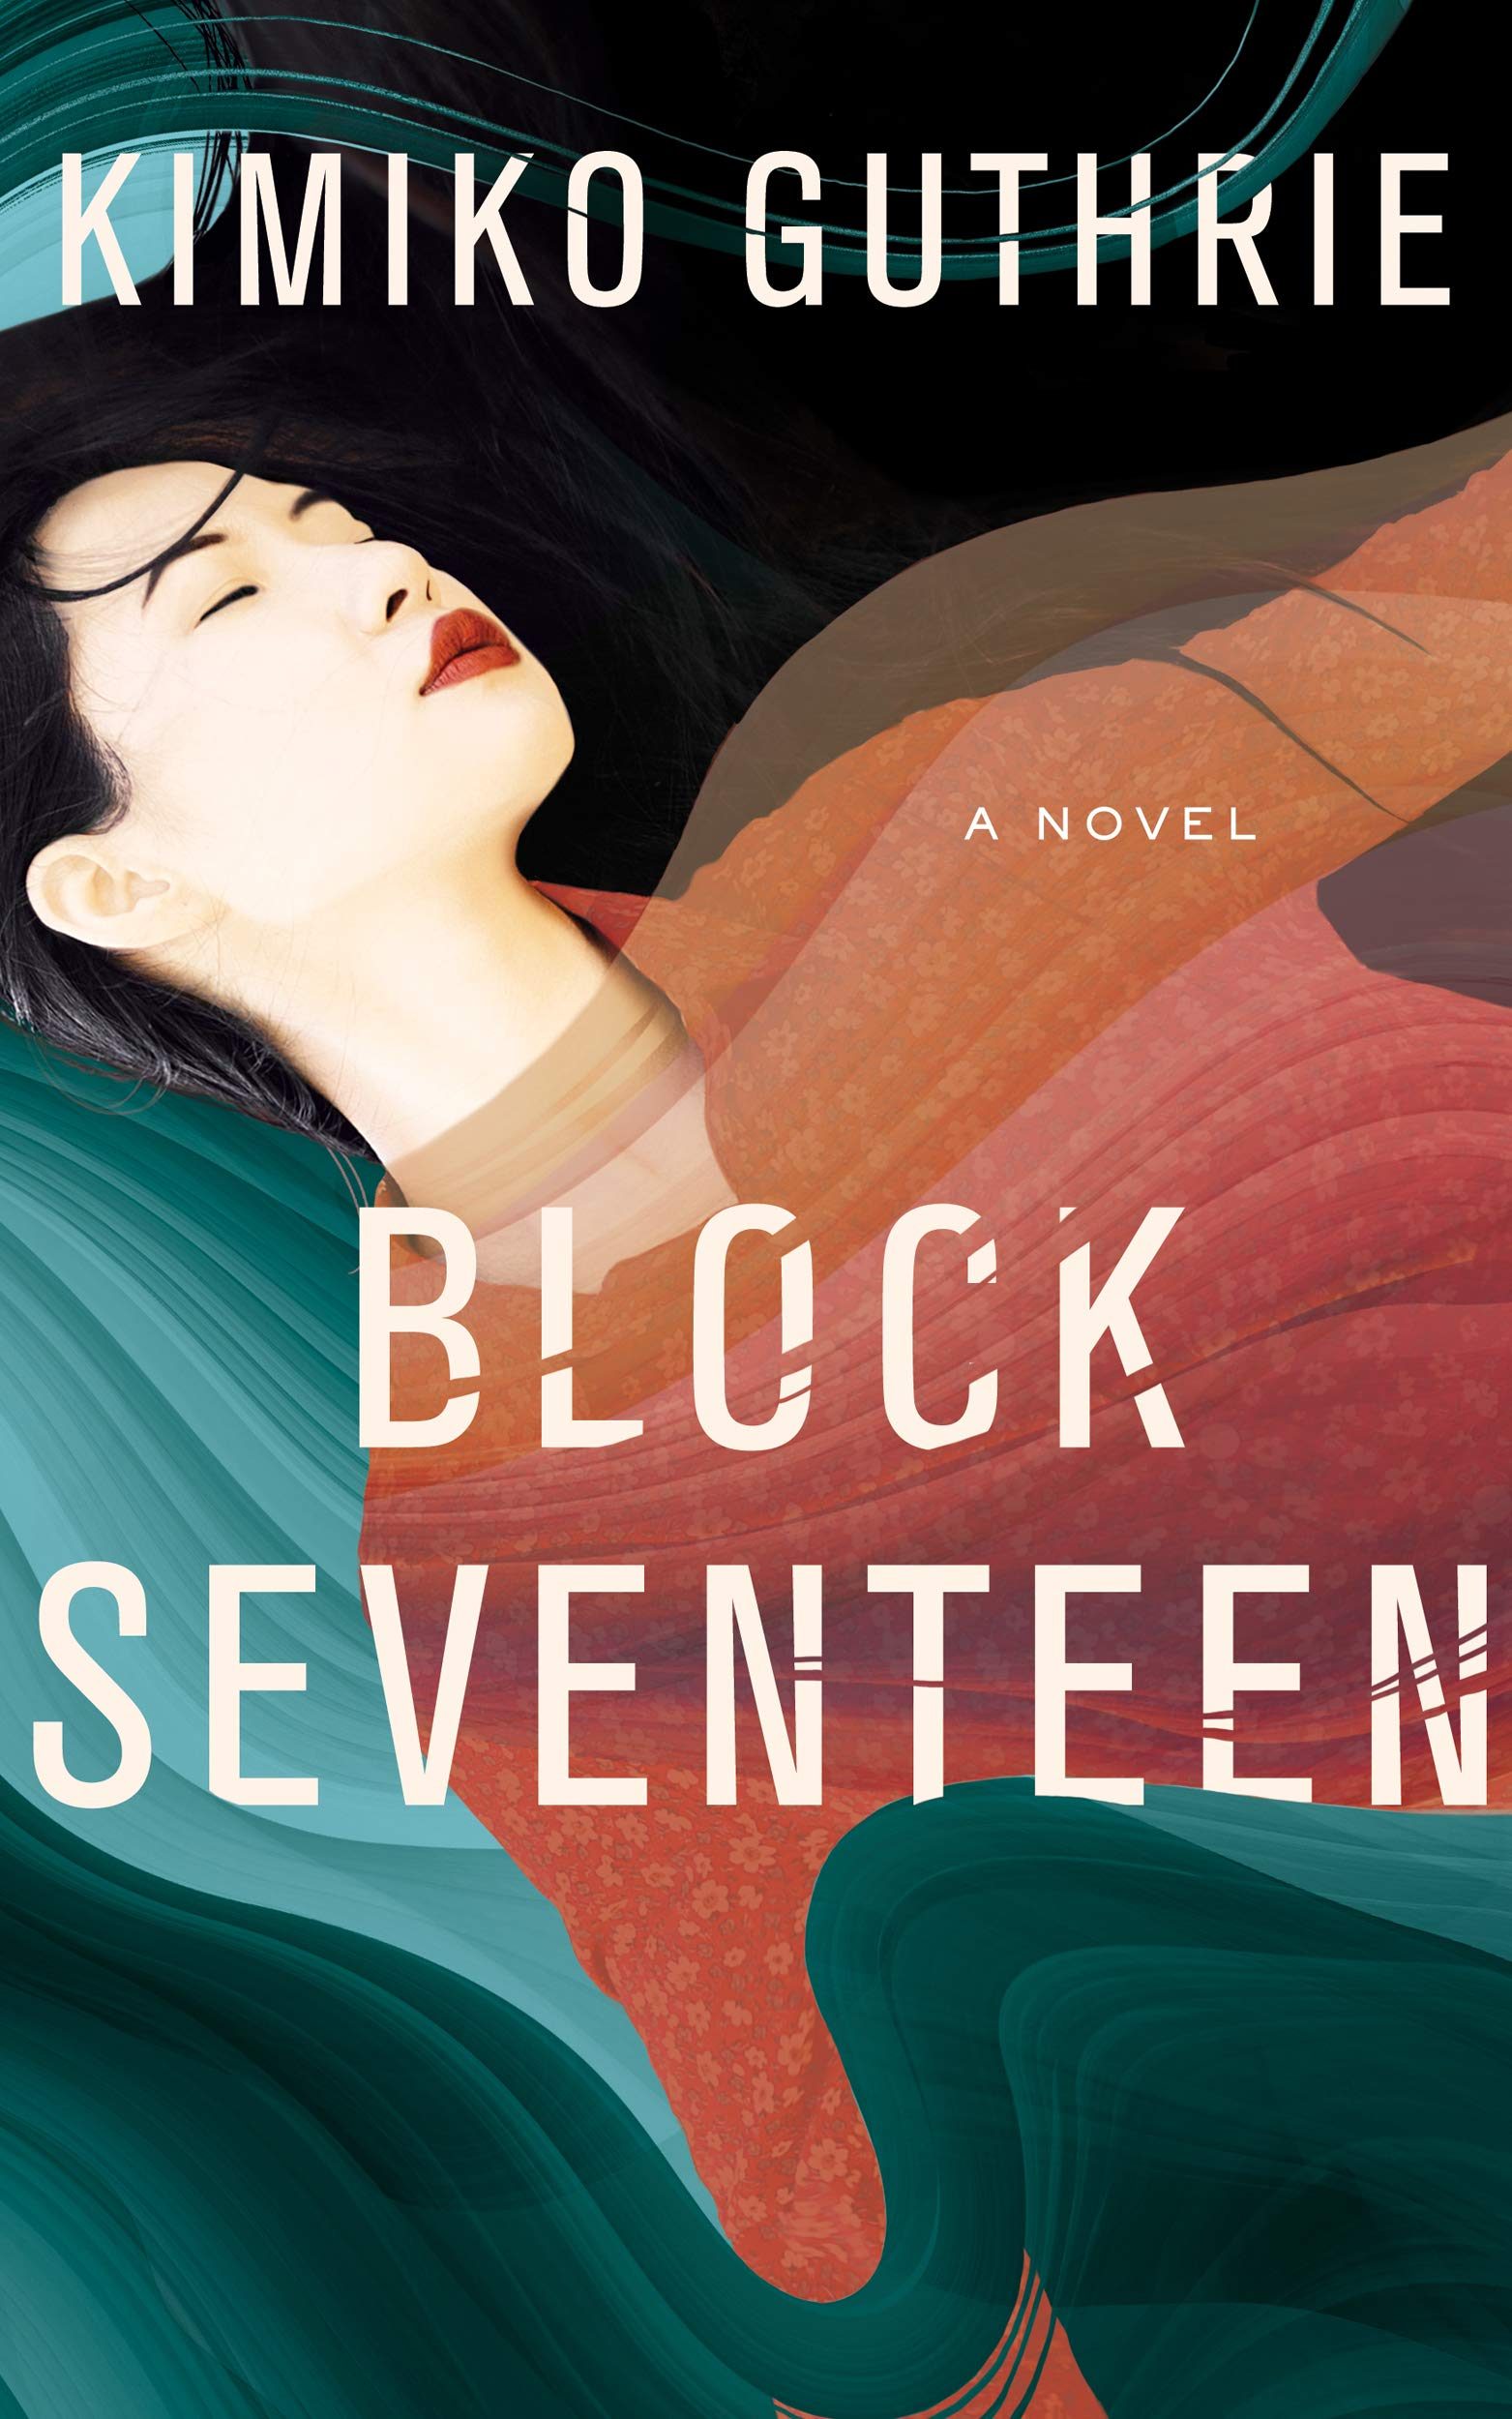 Block Seventeen - Novel By Kimiko Guthrie Release Date? 2020 Contemporary Fiction Releases